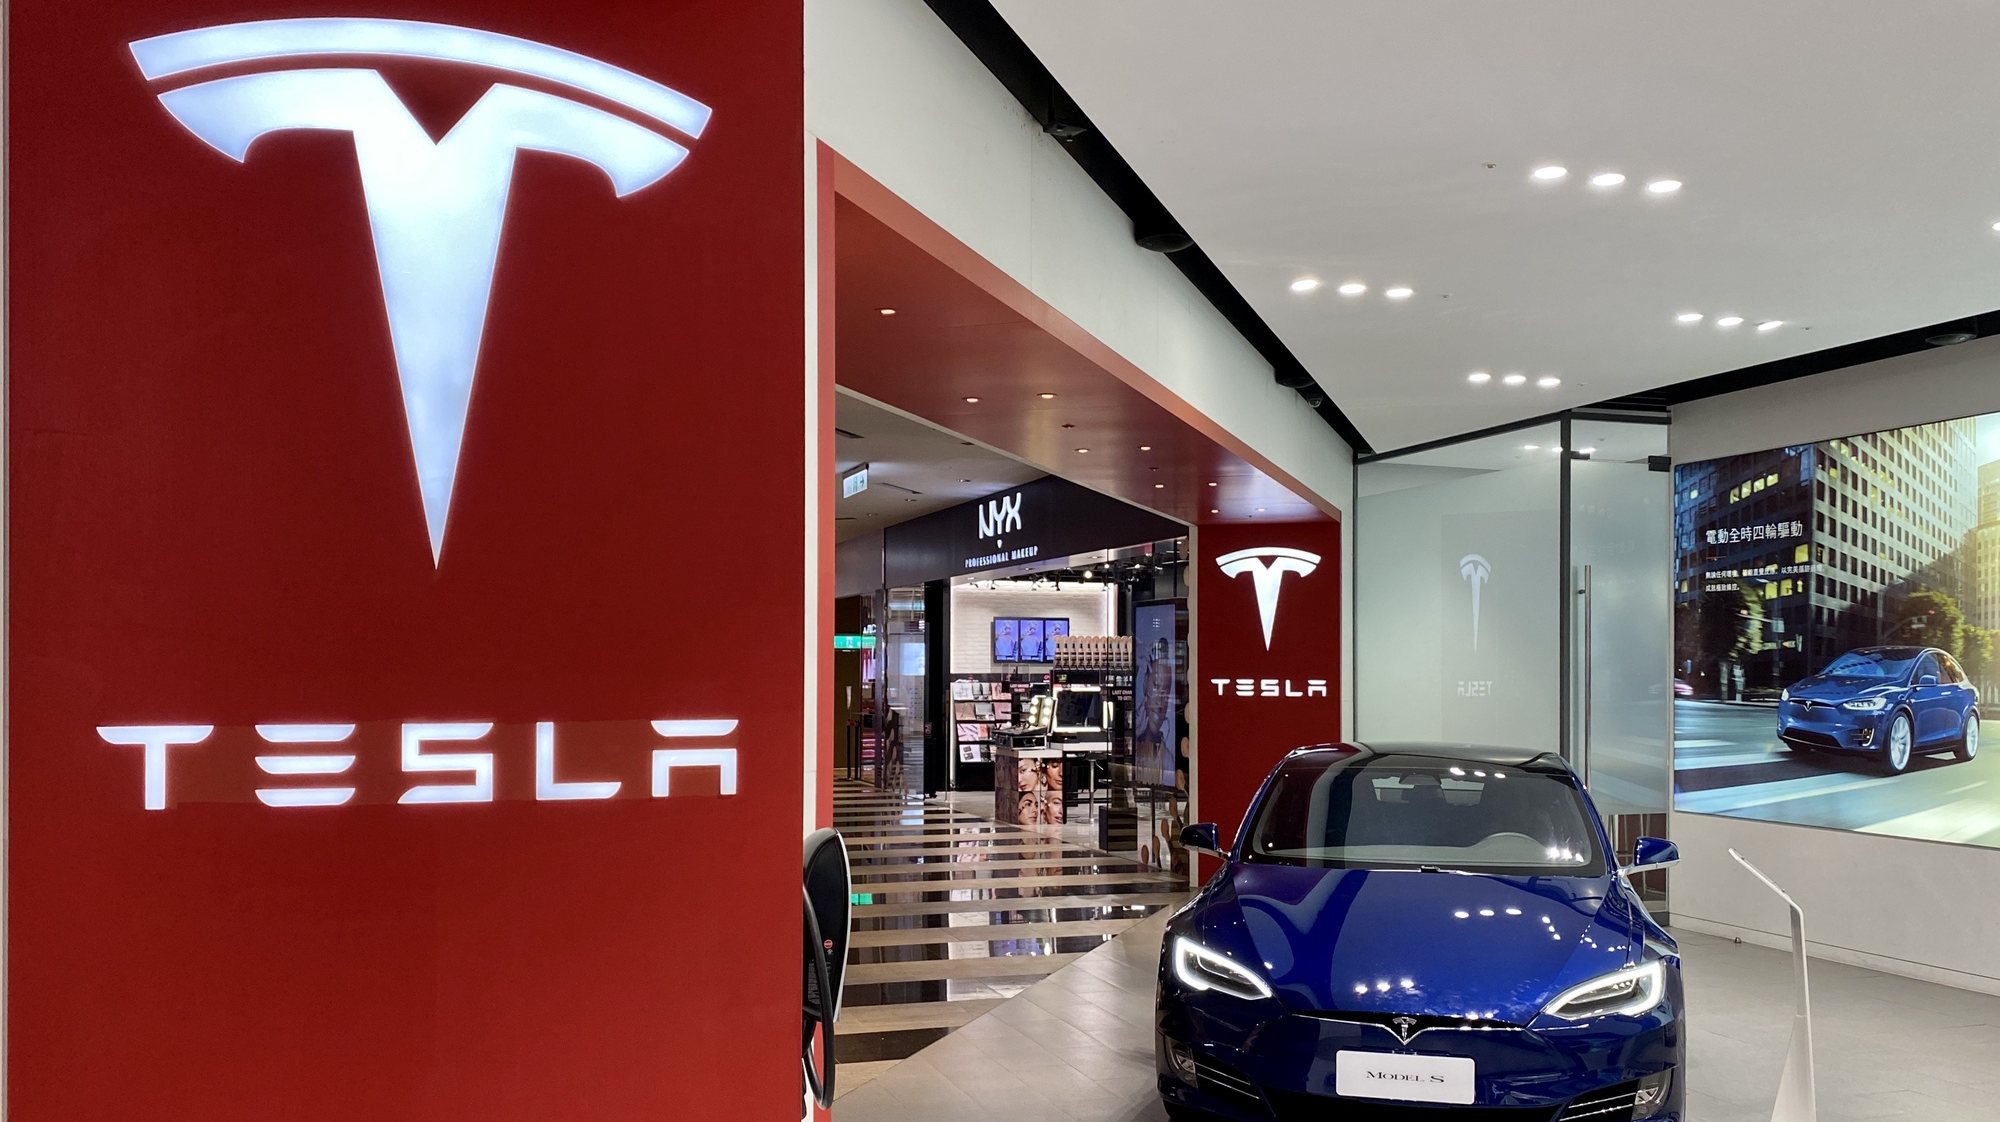 epa08764885 (FILE) - A Tesla Model S car on display inside a Tesla showroom in Taipei, Taiwan, 27 July 2020 (reissued 22 October 2020). Tesla on 22 October 2020 published their 3rd quarter 2020 results, saying their 3rd quarter operating income stood at 809 million USD. The company also said had delivered almost 140,000 automobiles in the 3rd quarter. Tesla saw their shares rise 5,5 per cent ahead of the stock markets opening following the good news.  EPA/RITCHIE B. TONGO *** Local Caption *** 56238442